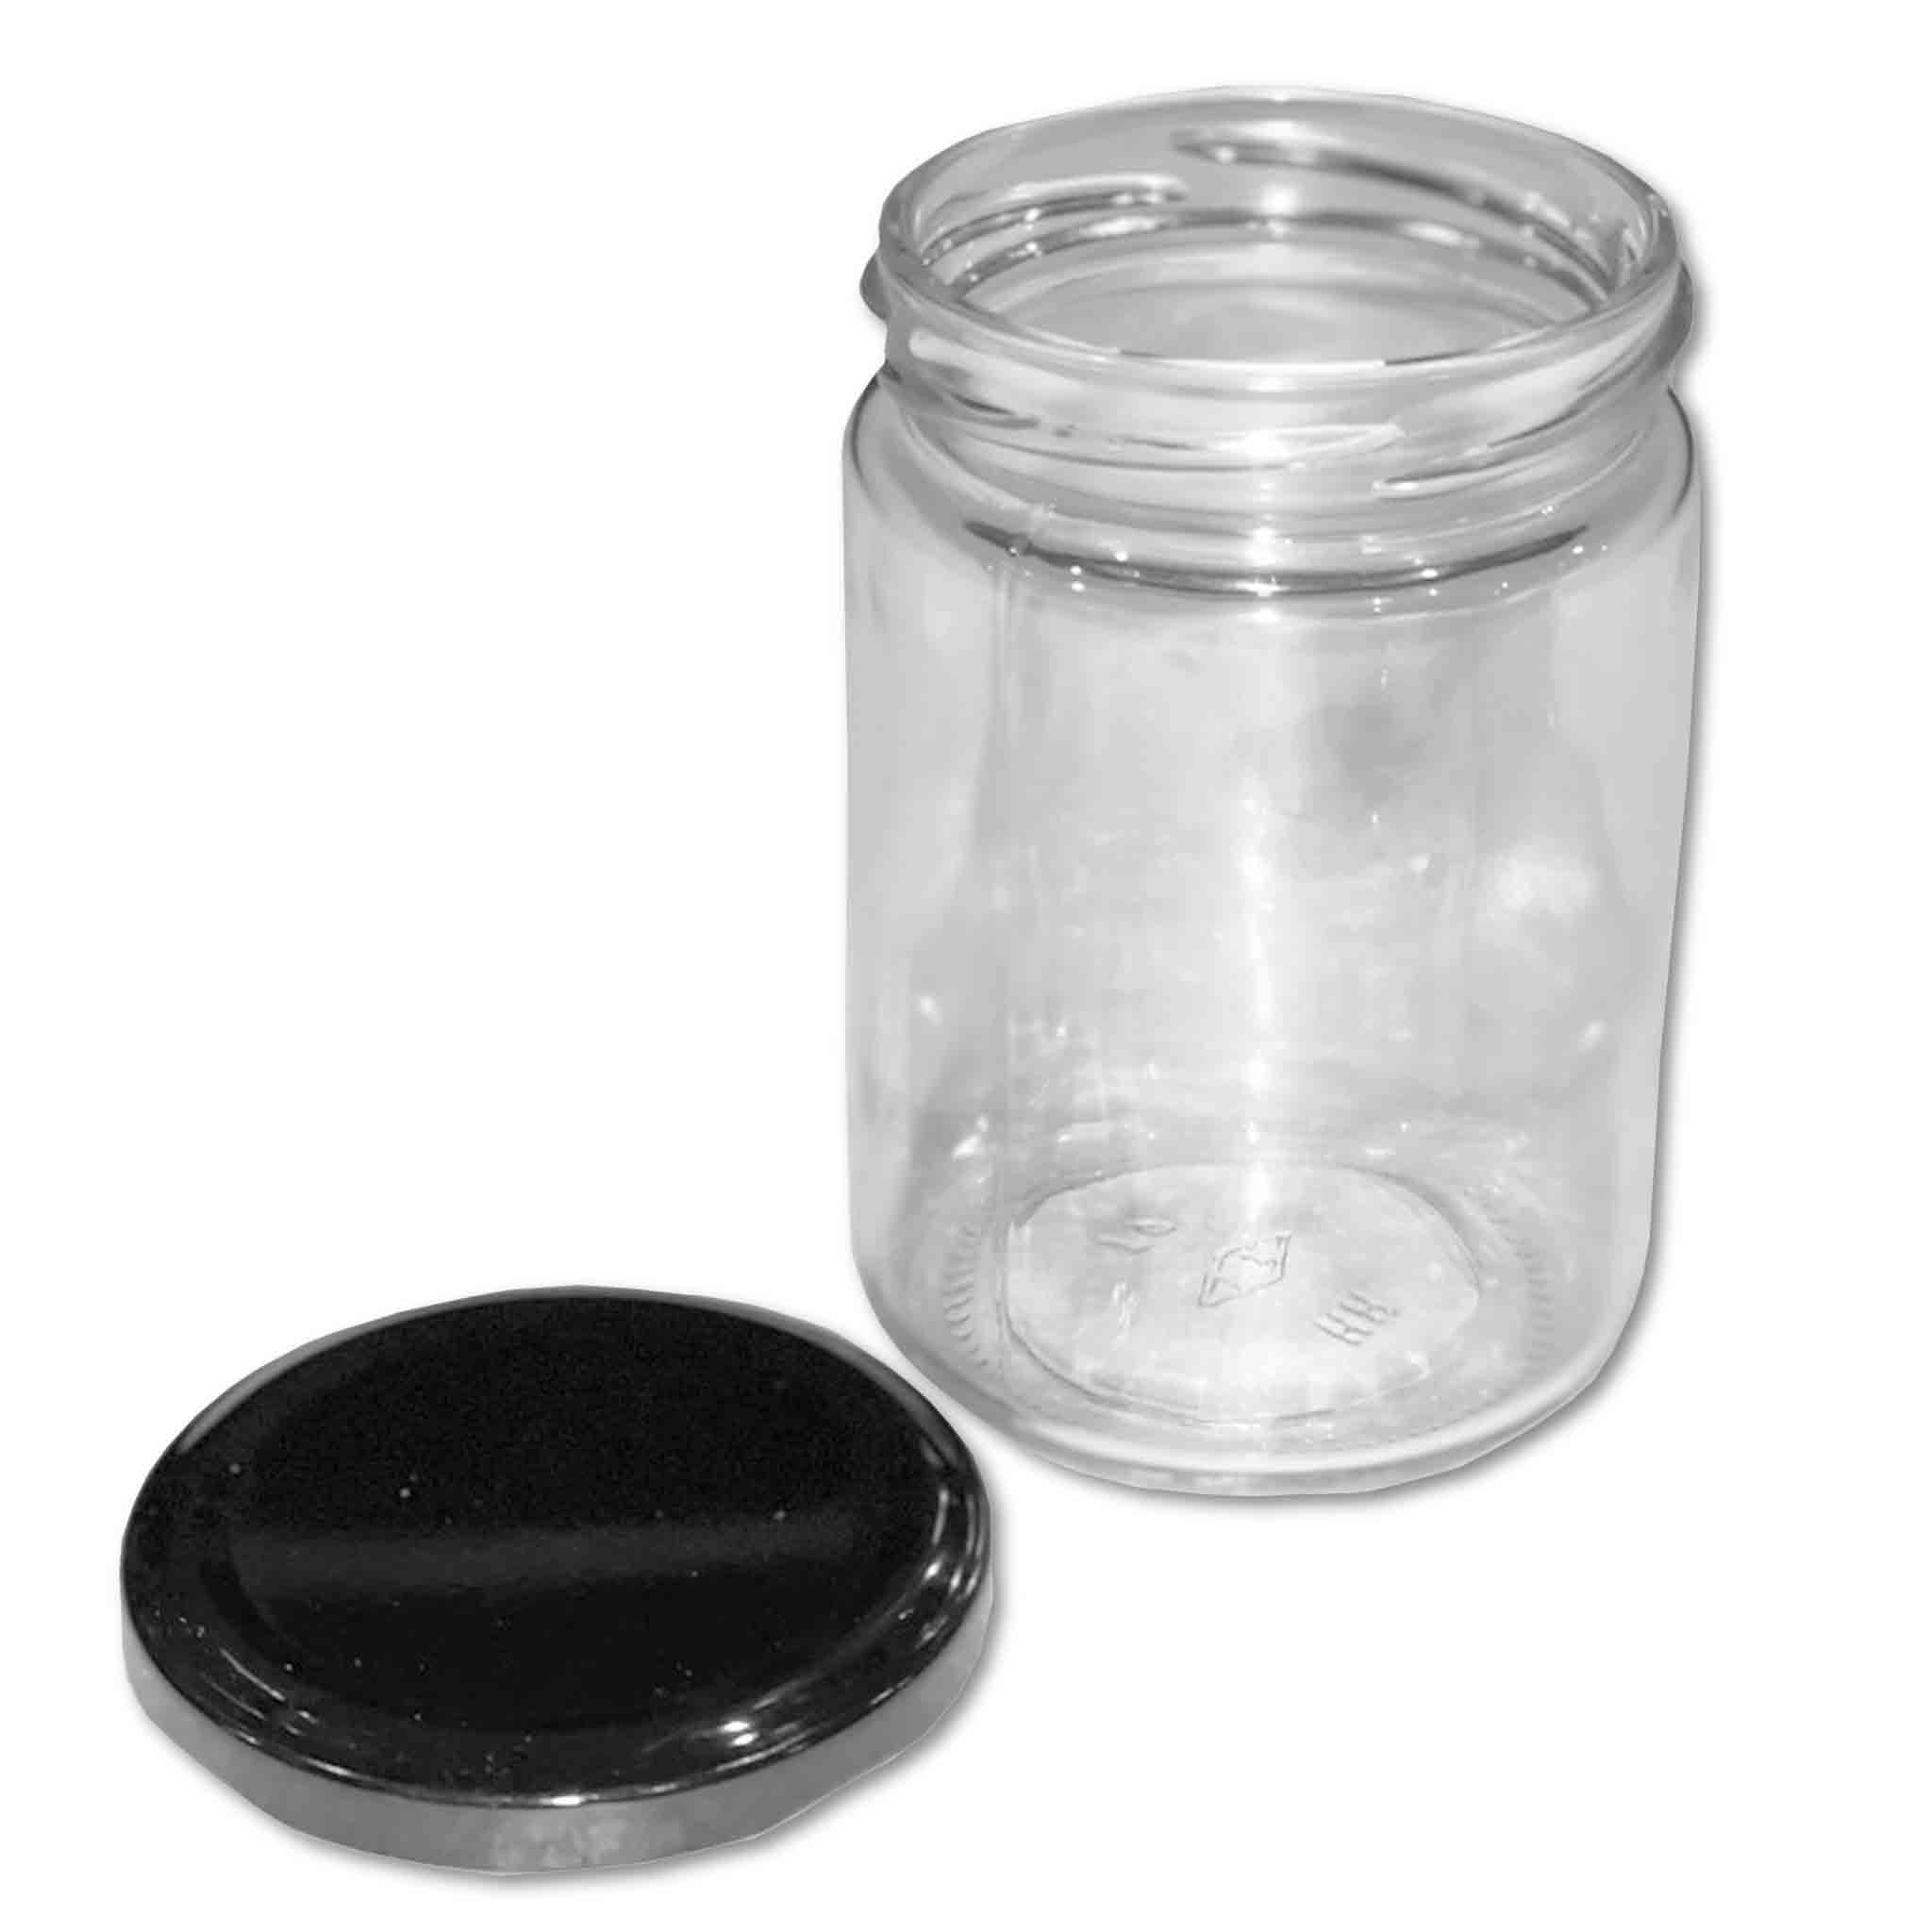 Honey Round Clear Glass Jar - 380ml (105 Pack) - Processing collection by Buzzbee Beekeeping Supplies